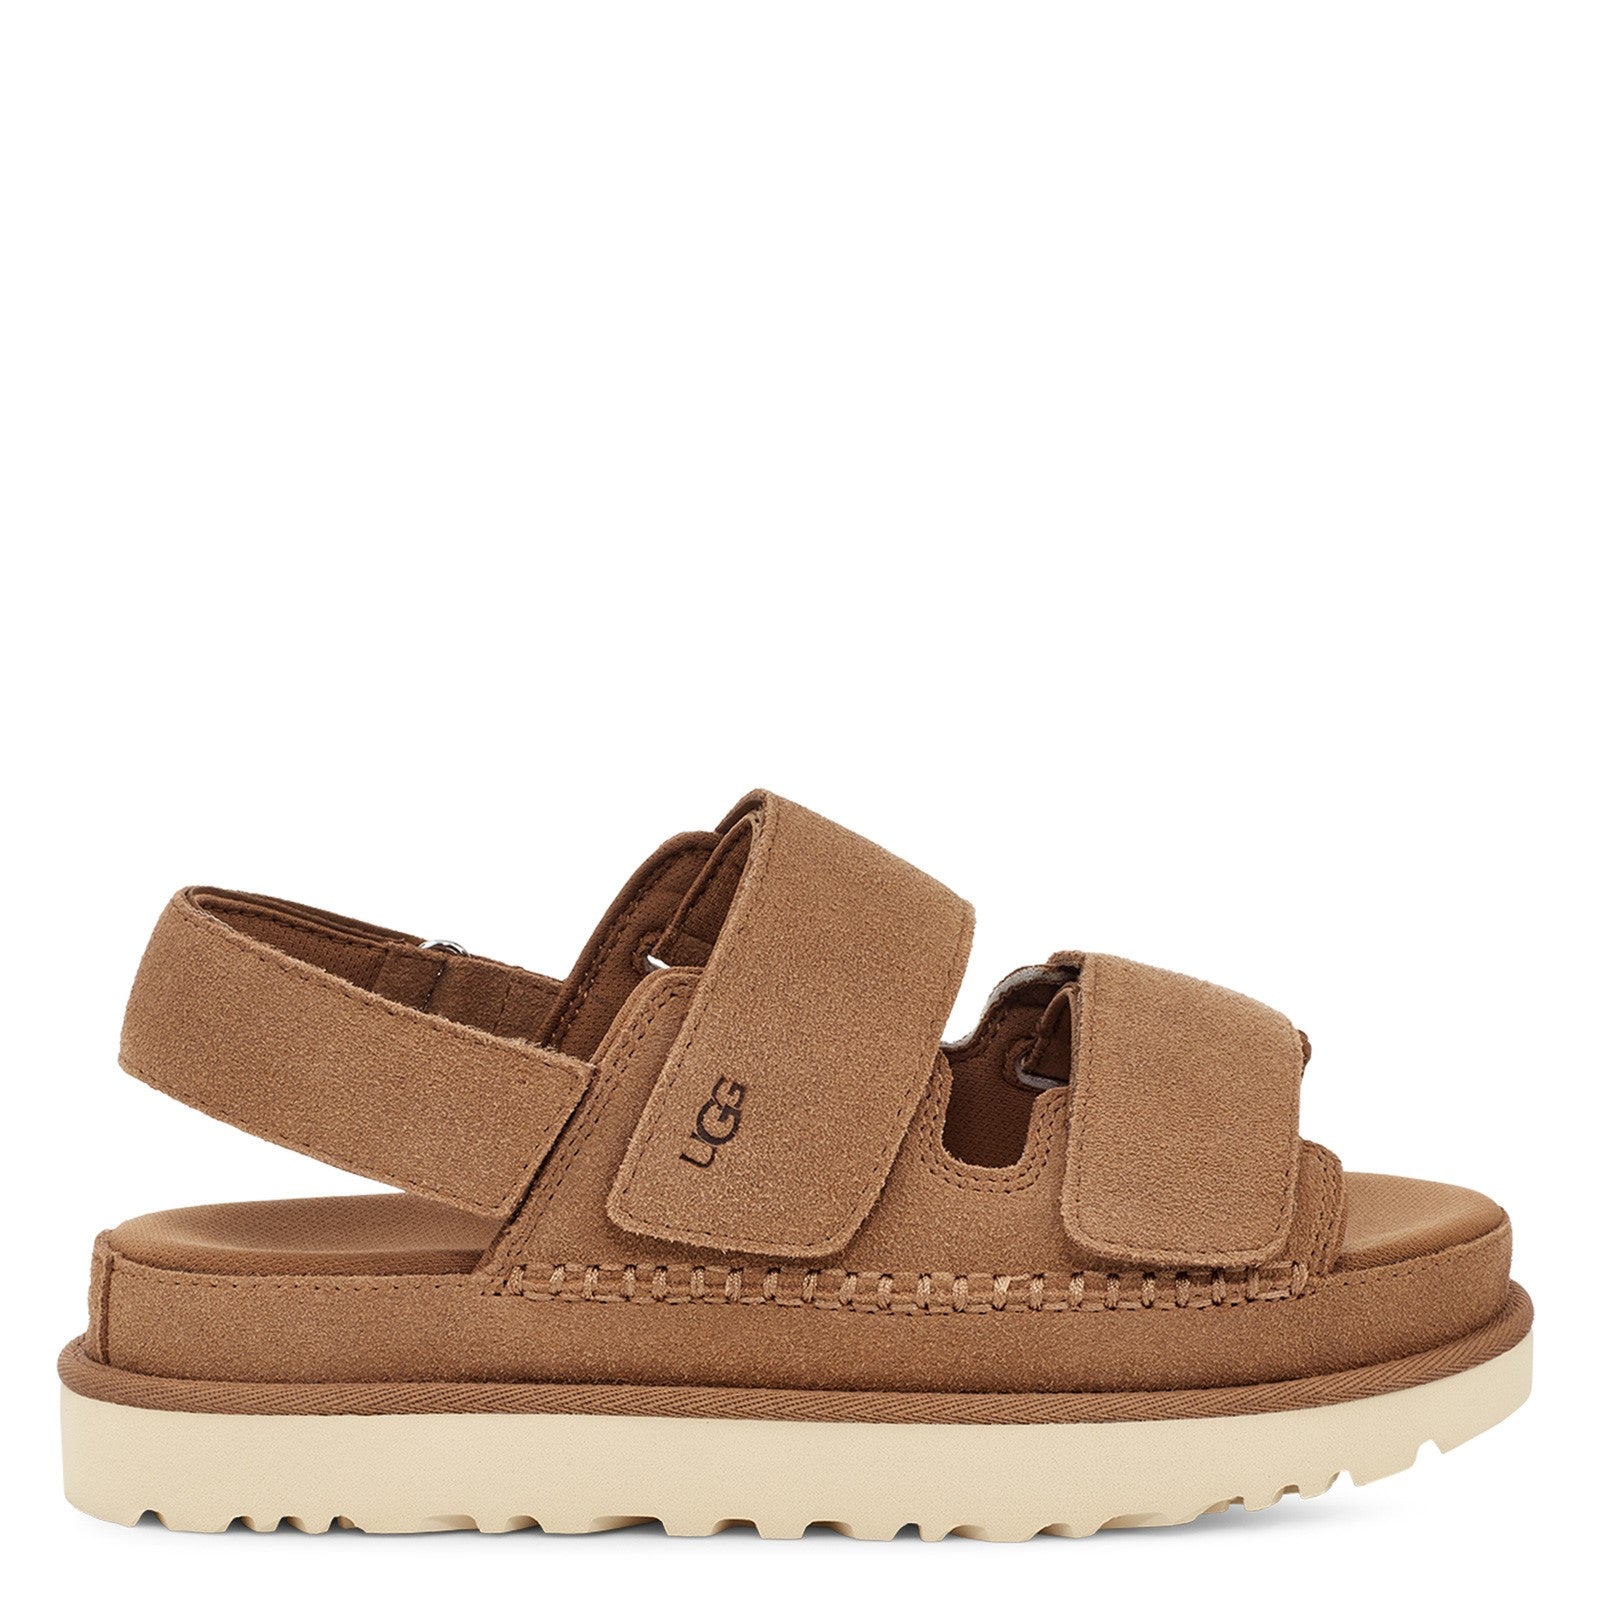 Lateral view of the Women's Goldenstar Sling by UGG in the color Chestnut